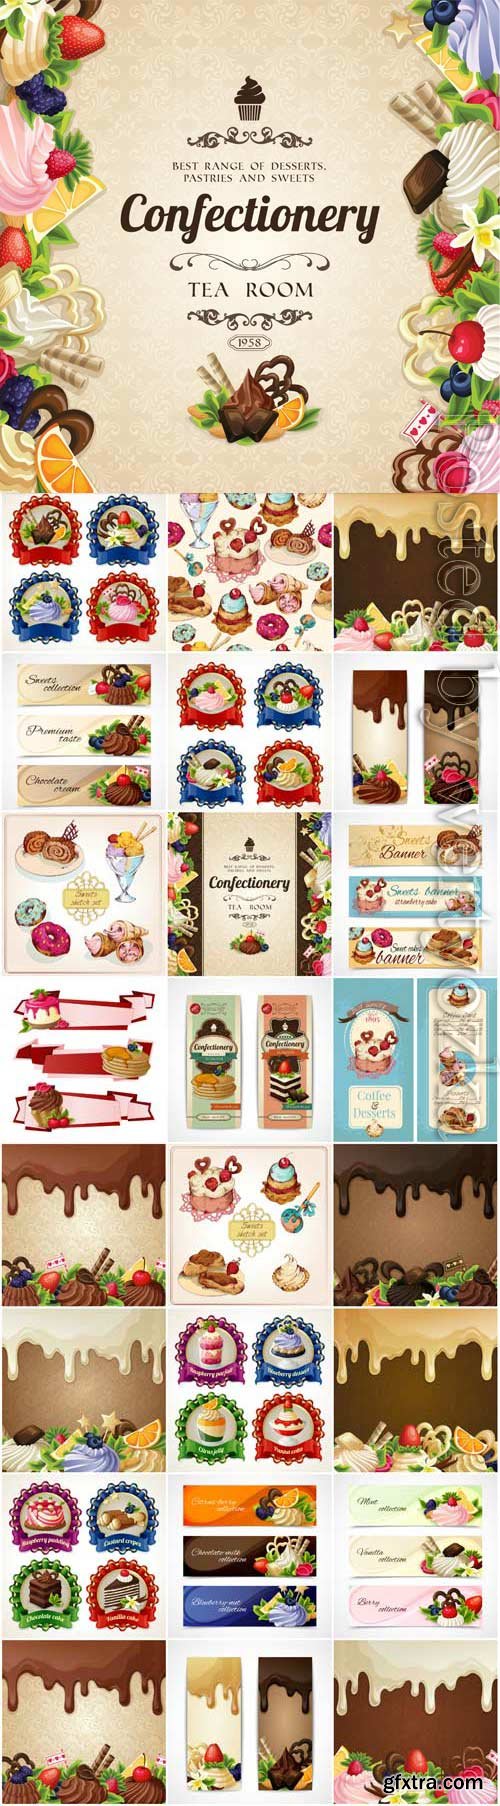 Backgrounds and banners with sweets, labels in vector